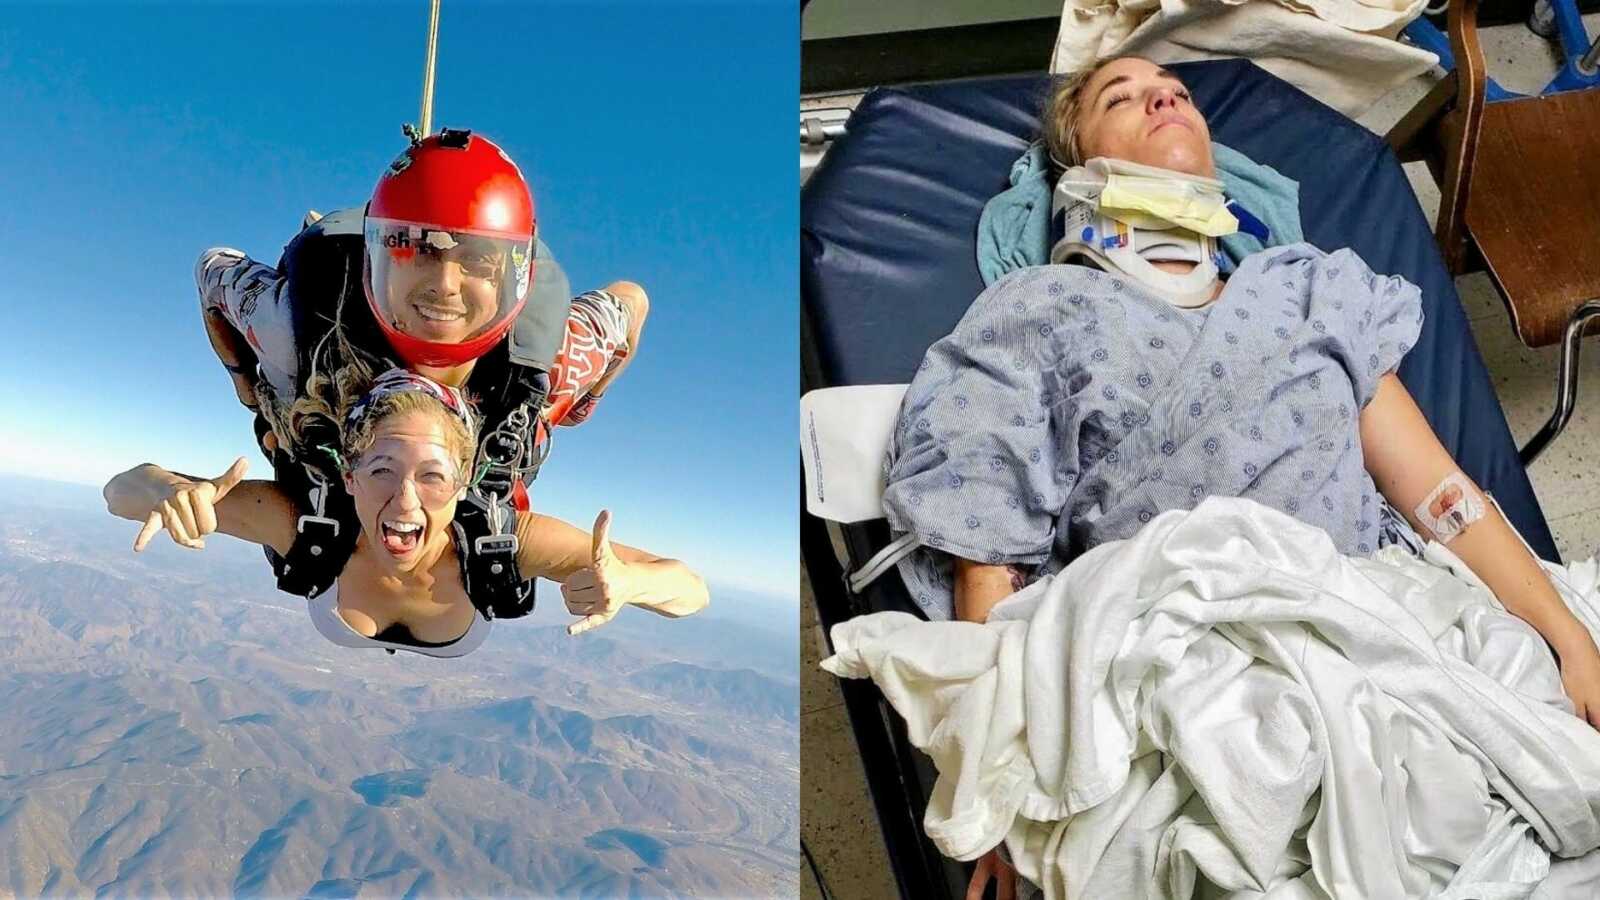 skydiver suffers spinal cord injury